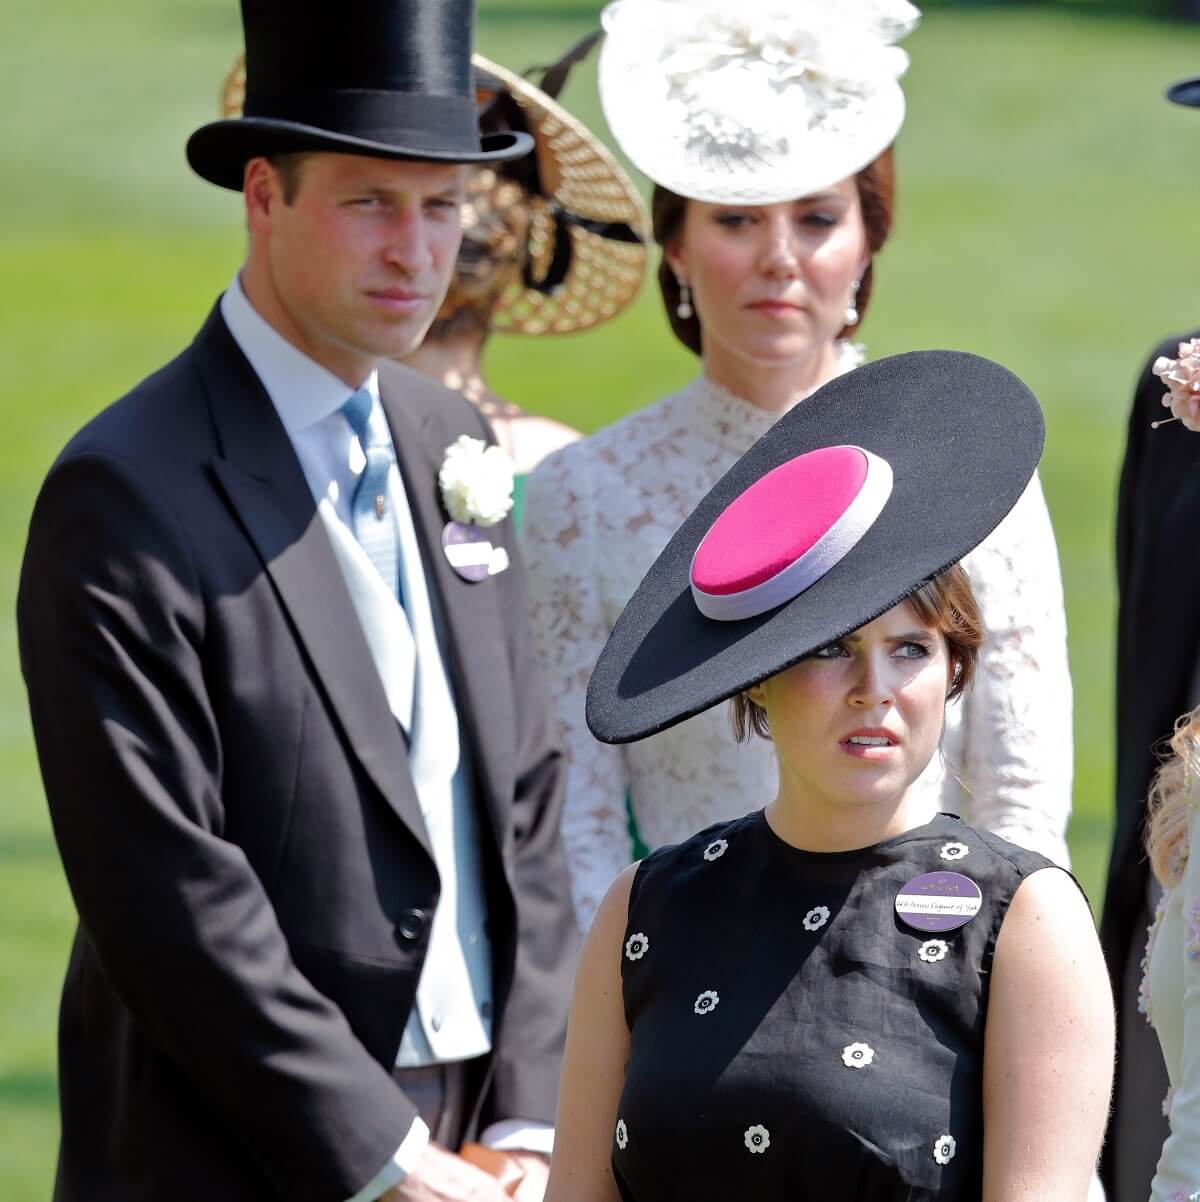 Princess Eugenie, Prince William, and Kate Middleton attend day 1 of Royal Ascot at Ascot Racecourse